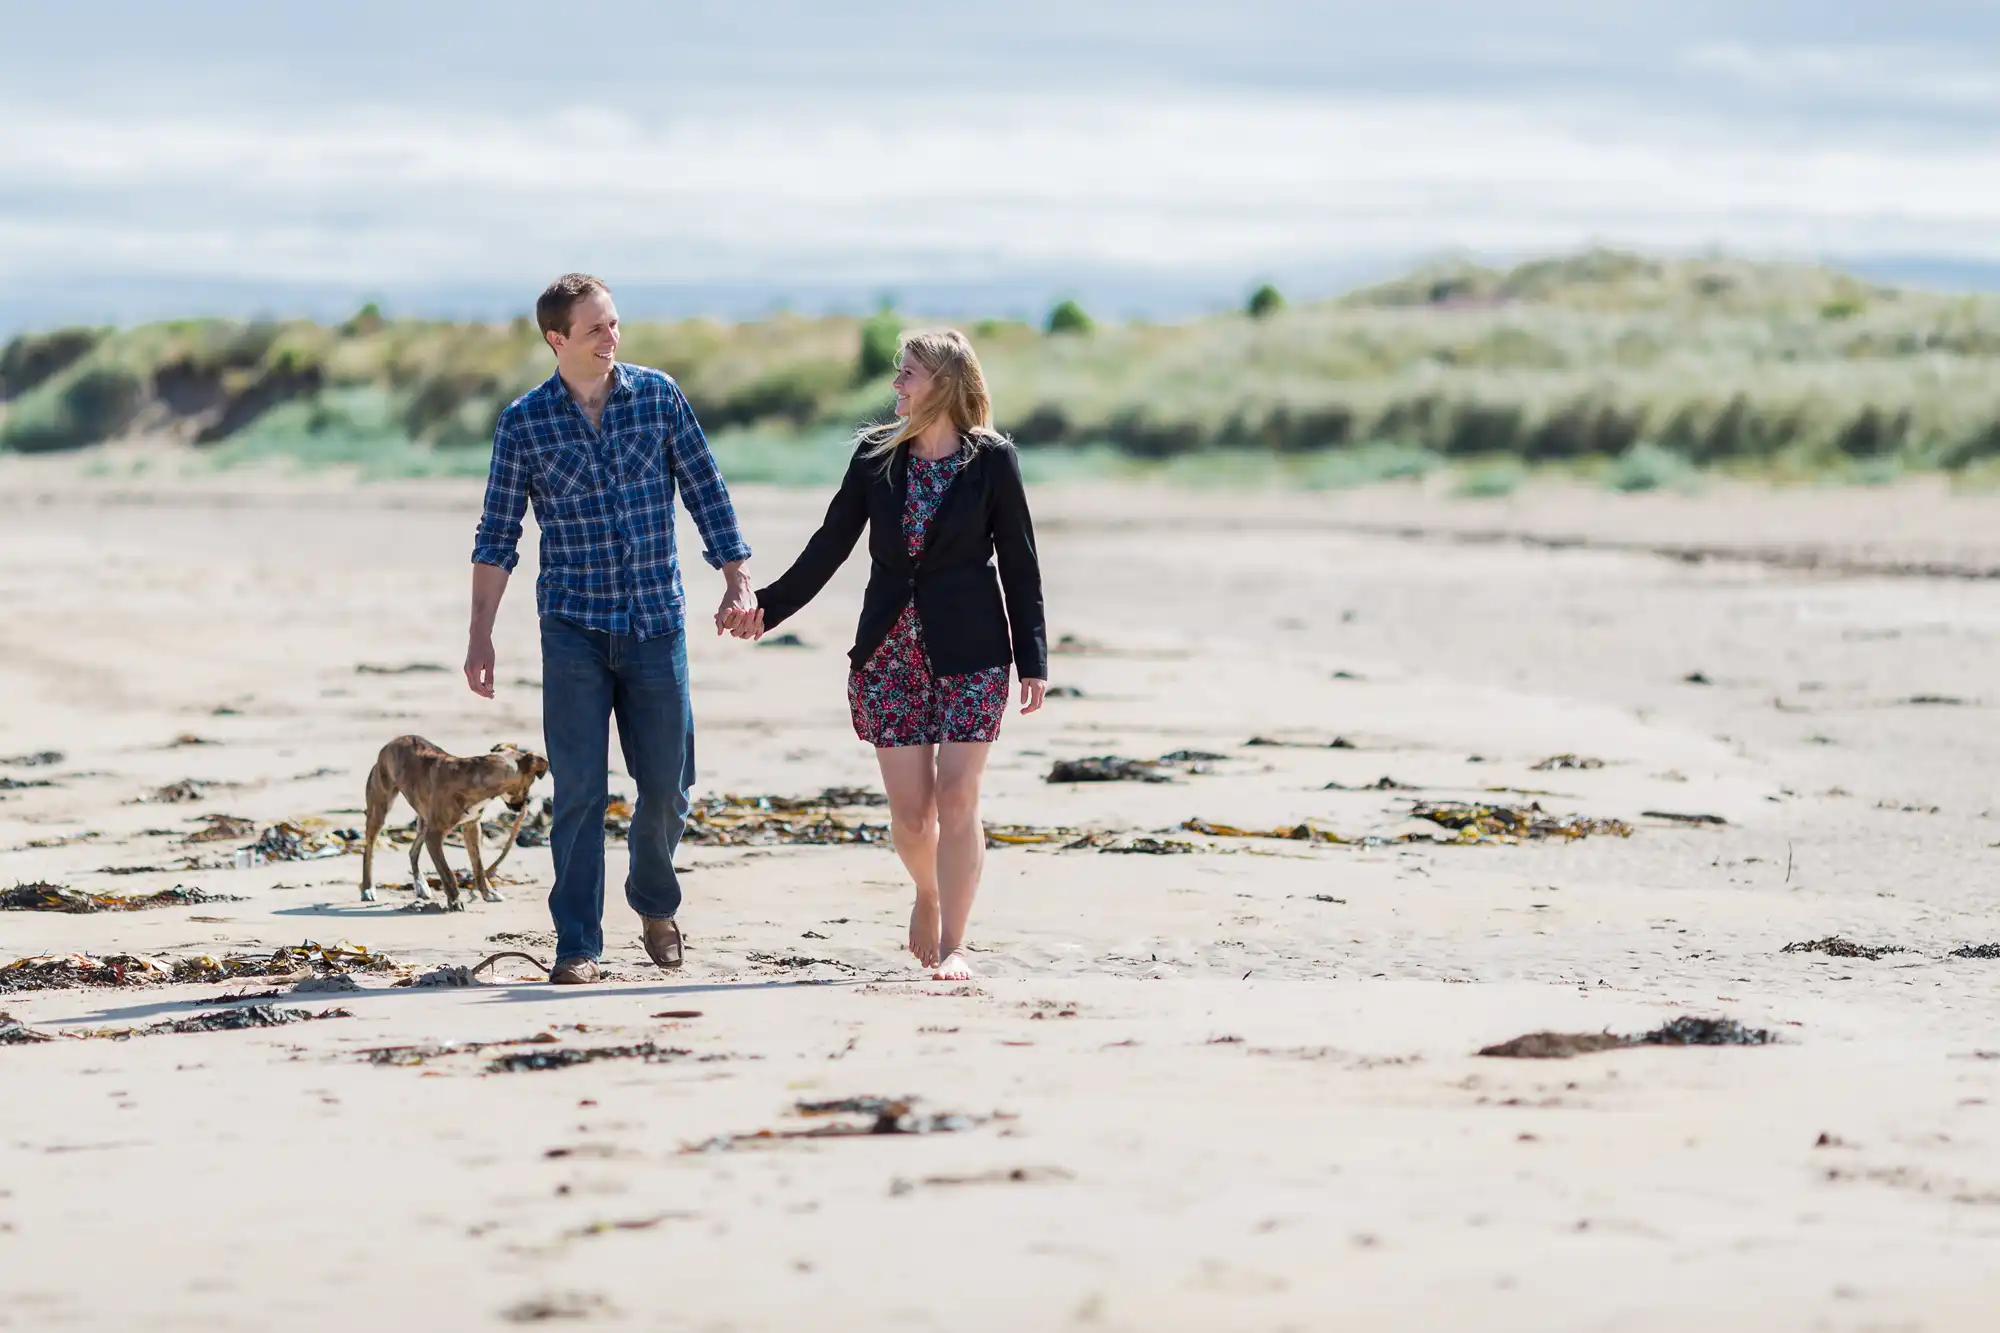 A couple walks hand-in-hand with their dog on a sandy beach, with grassy dunes in the background under a cloudy sky.